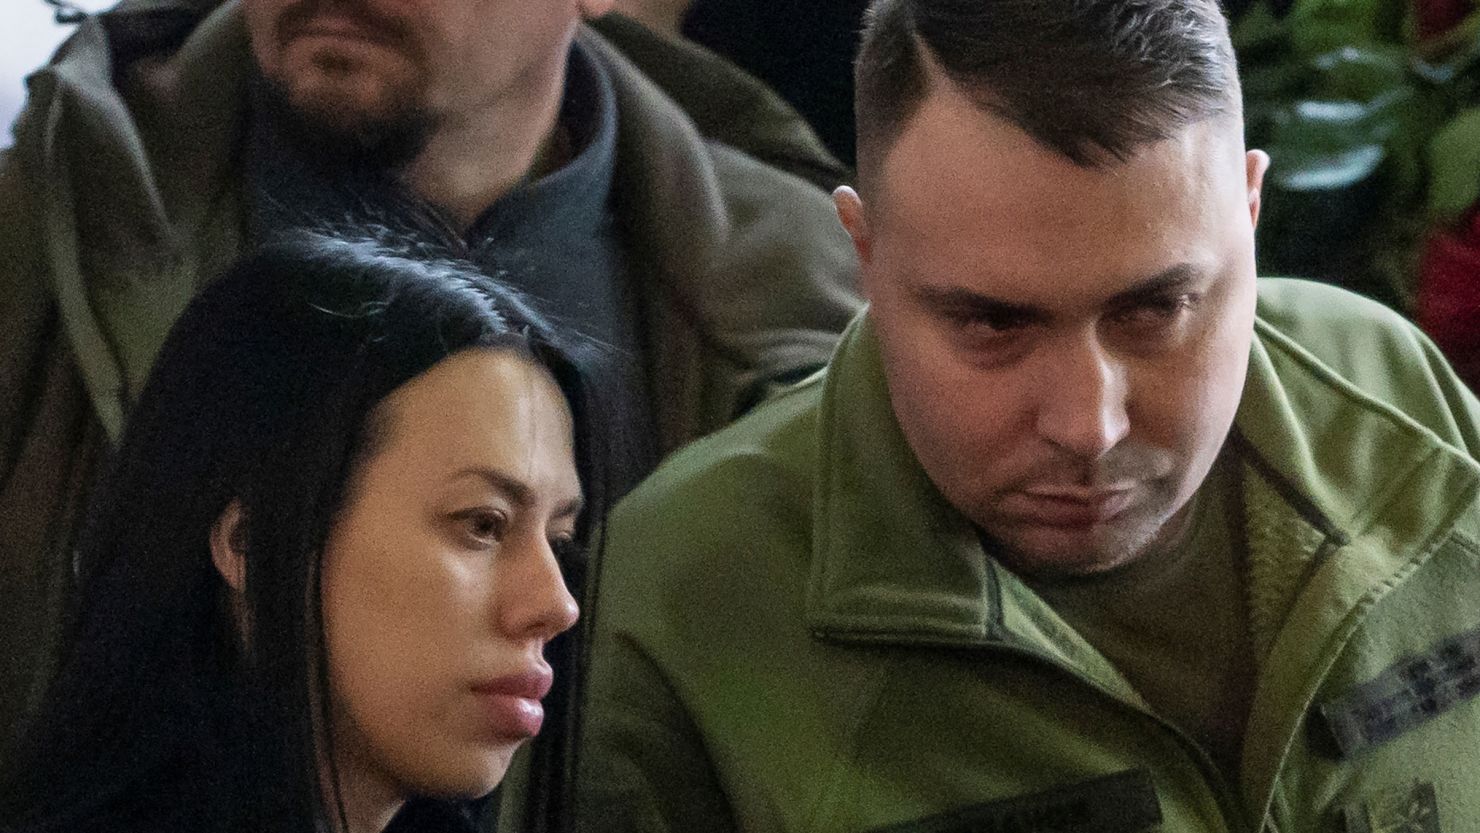 In this January 2023 photo, Ukraine's Military Intelligence chief Kyrylo Budanov and his wife Marianna attend a memorial ceremony for Ukrainian interior minister, his deputy and officials who died in helicopter crash near Ukrainian capital, amid Russia's attack on Ukraine, in Kyiv.